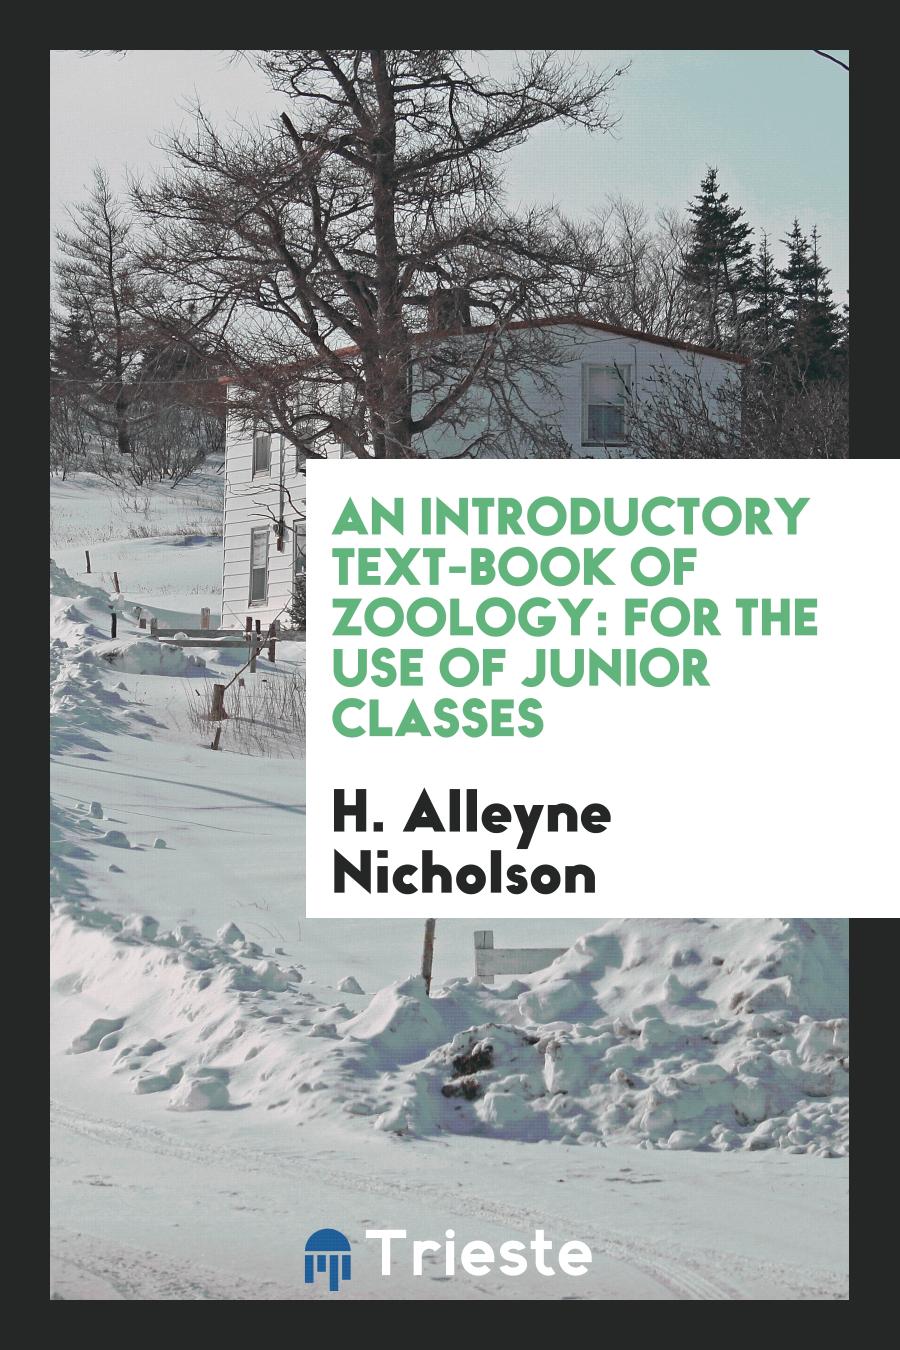 An Introductory Text-Book of Zoology: For the Use of Junior Classes